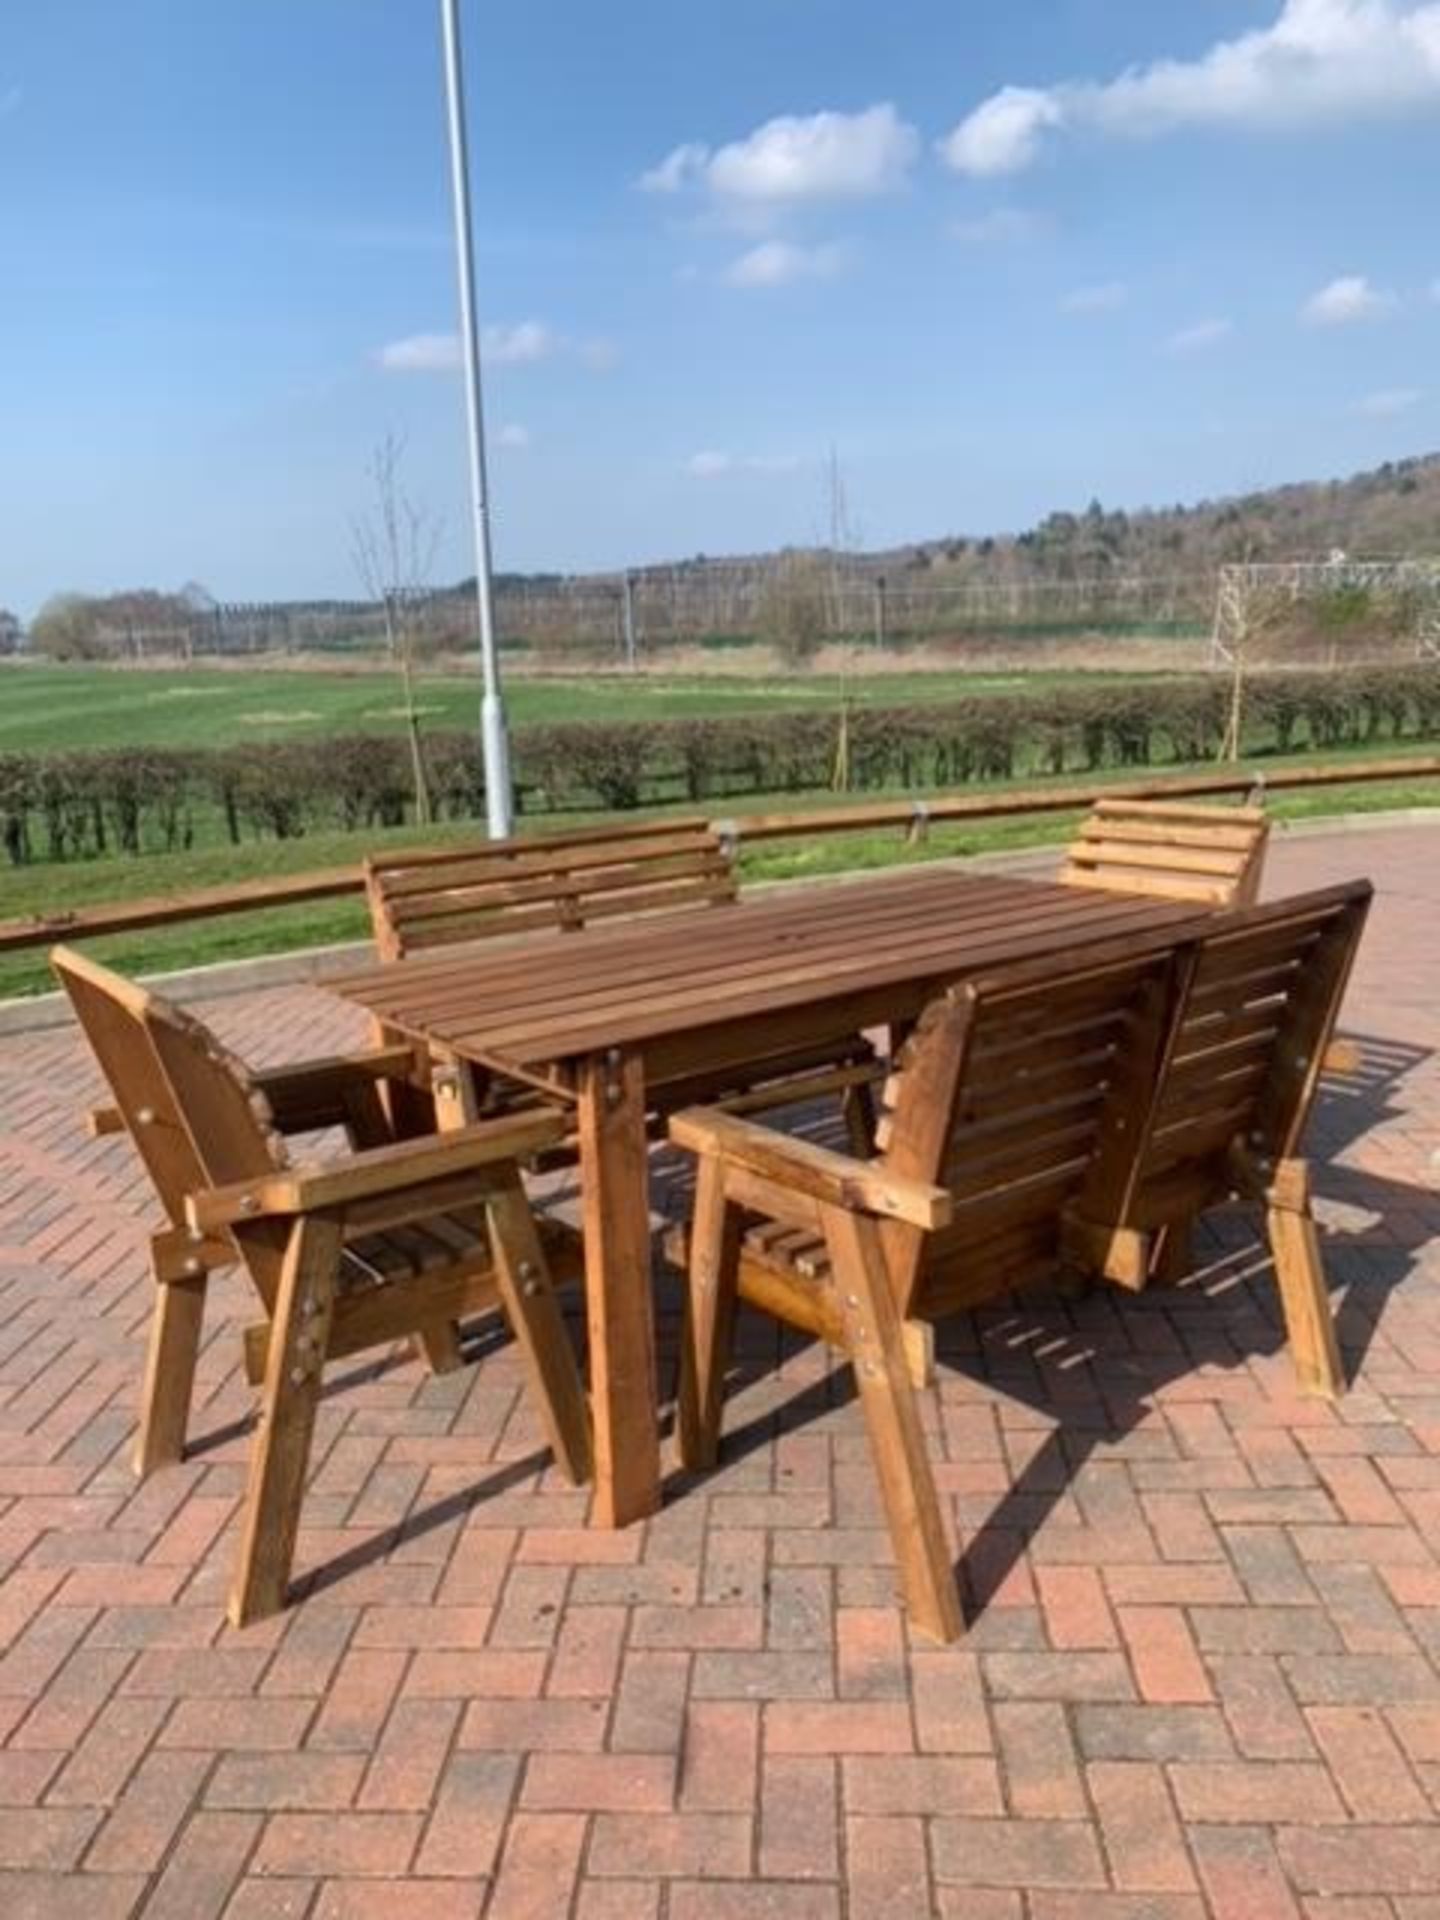 BRAND NEW QUALITY 6 seater handcrafted Garden Furniture set,Large table, 2 benches, 2 chairs*NO VAT* - Image 3 of 7